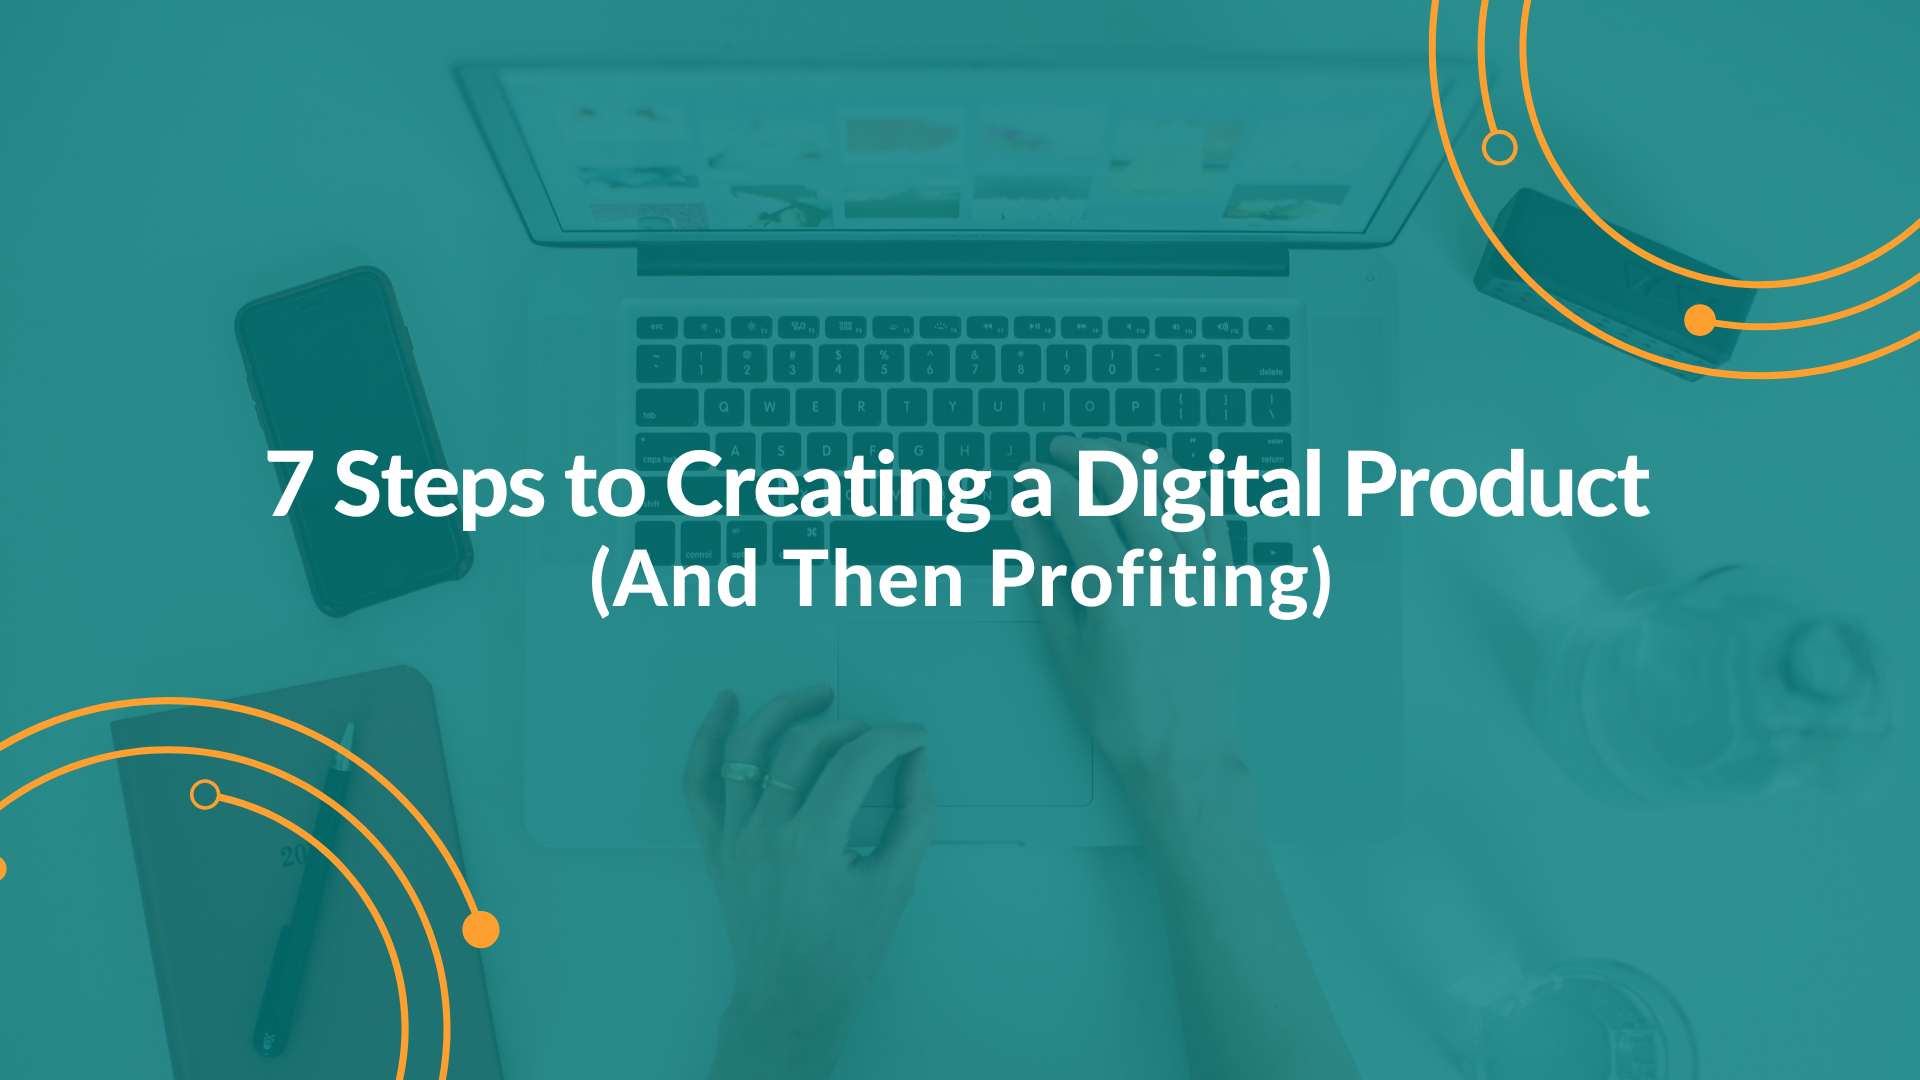 7 Steps to Creating a Digital Product